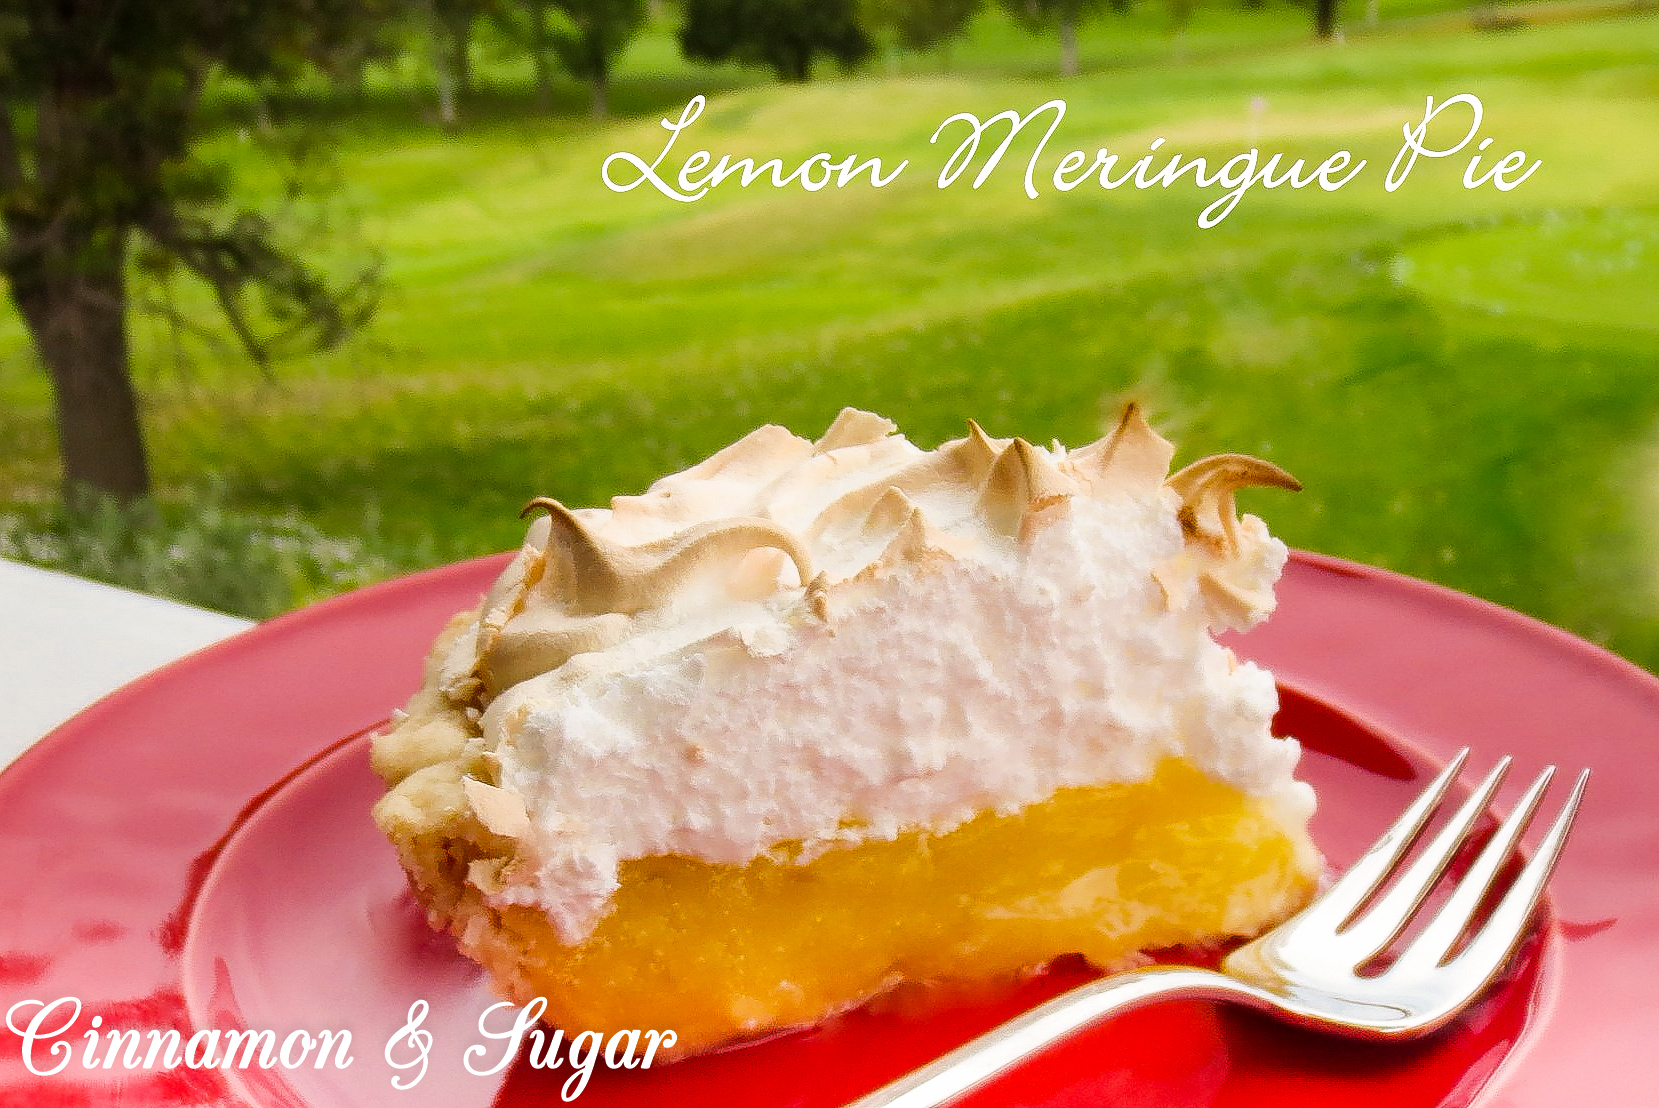 Lemon meringue pie: Cool, sunny yellow lemony filling with just the right balance of sweet and tart piled high with glossy, creamy meringue. Recipe from #cozymystery FARM FRESH MURDER by Paige Shelton